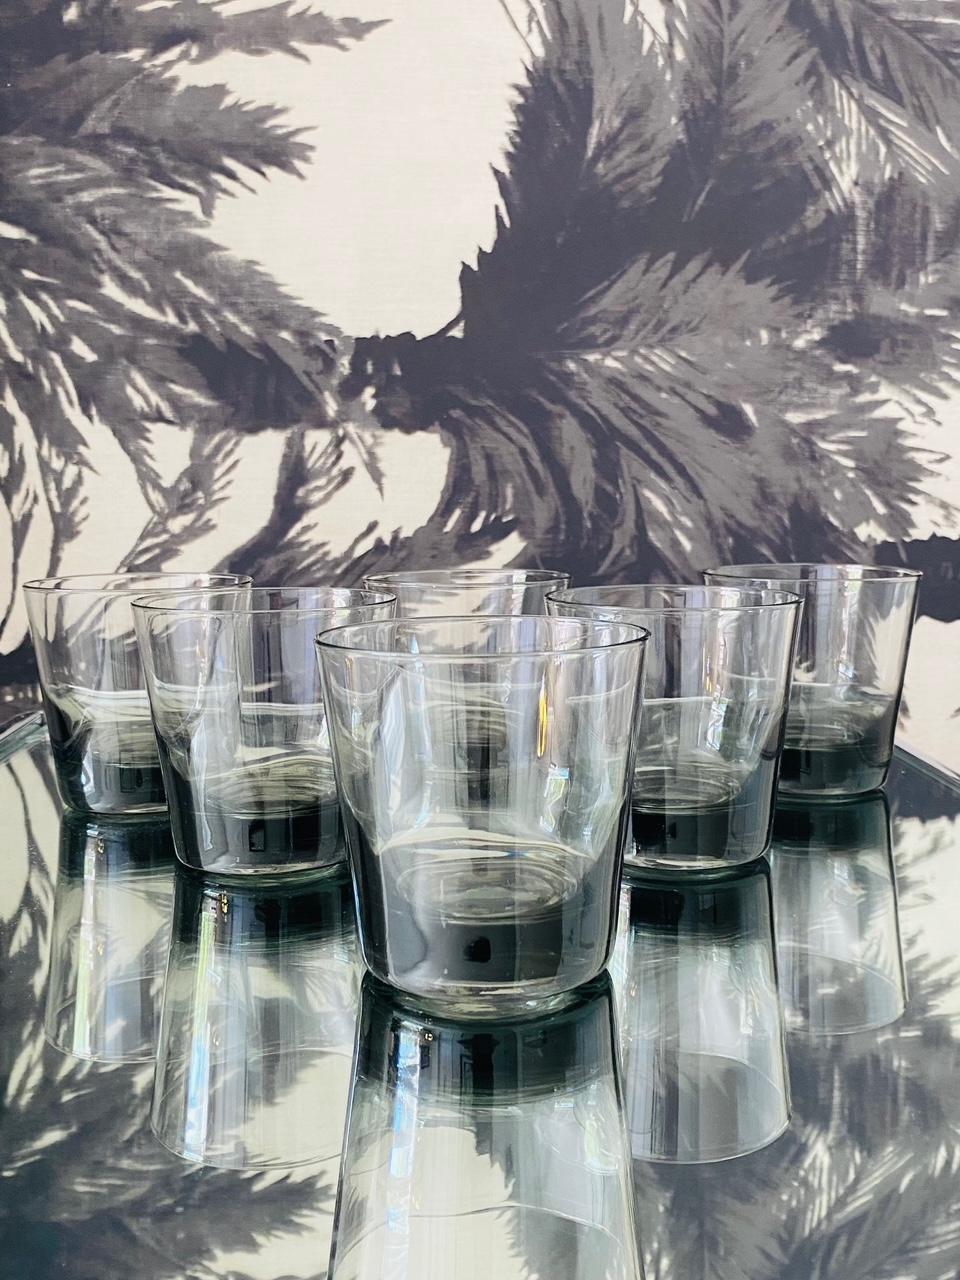 Set of eight vintage whiskey rock glasses with streamline design. The barware glasses are handblown with slightly tapered forms in translucent smoked grey glass. Makes a handsome addition to any barware or dinnerware collection.